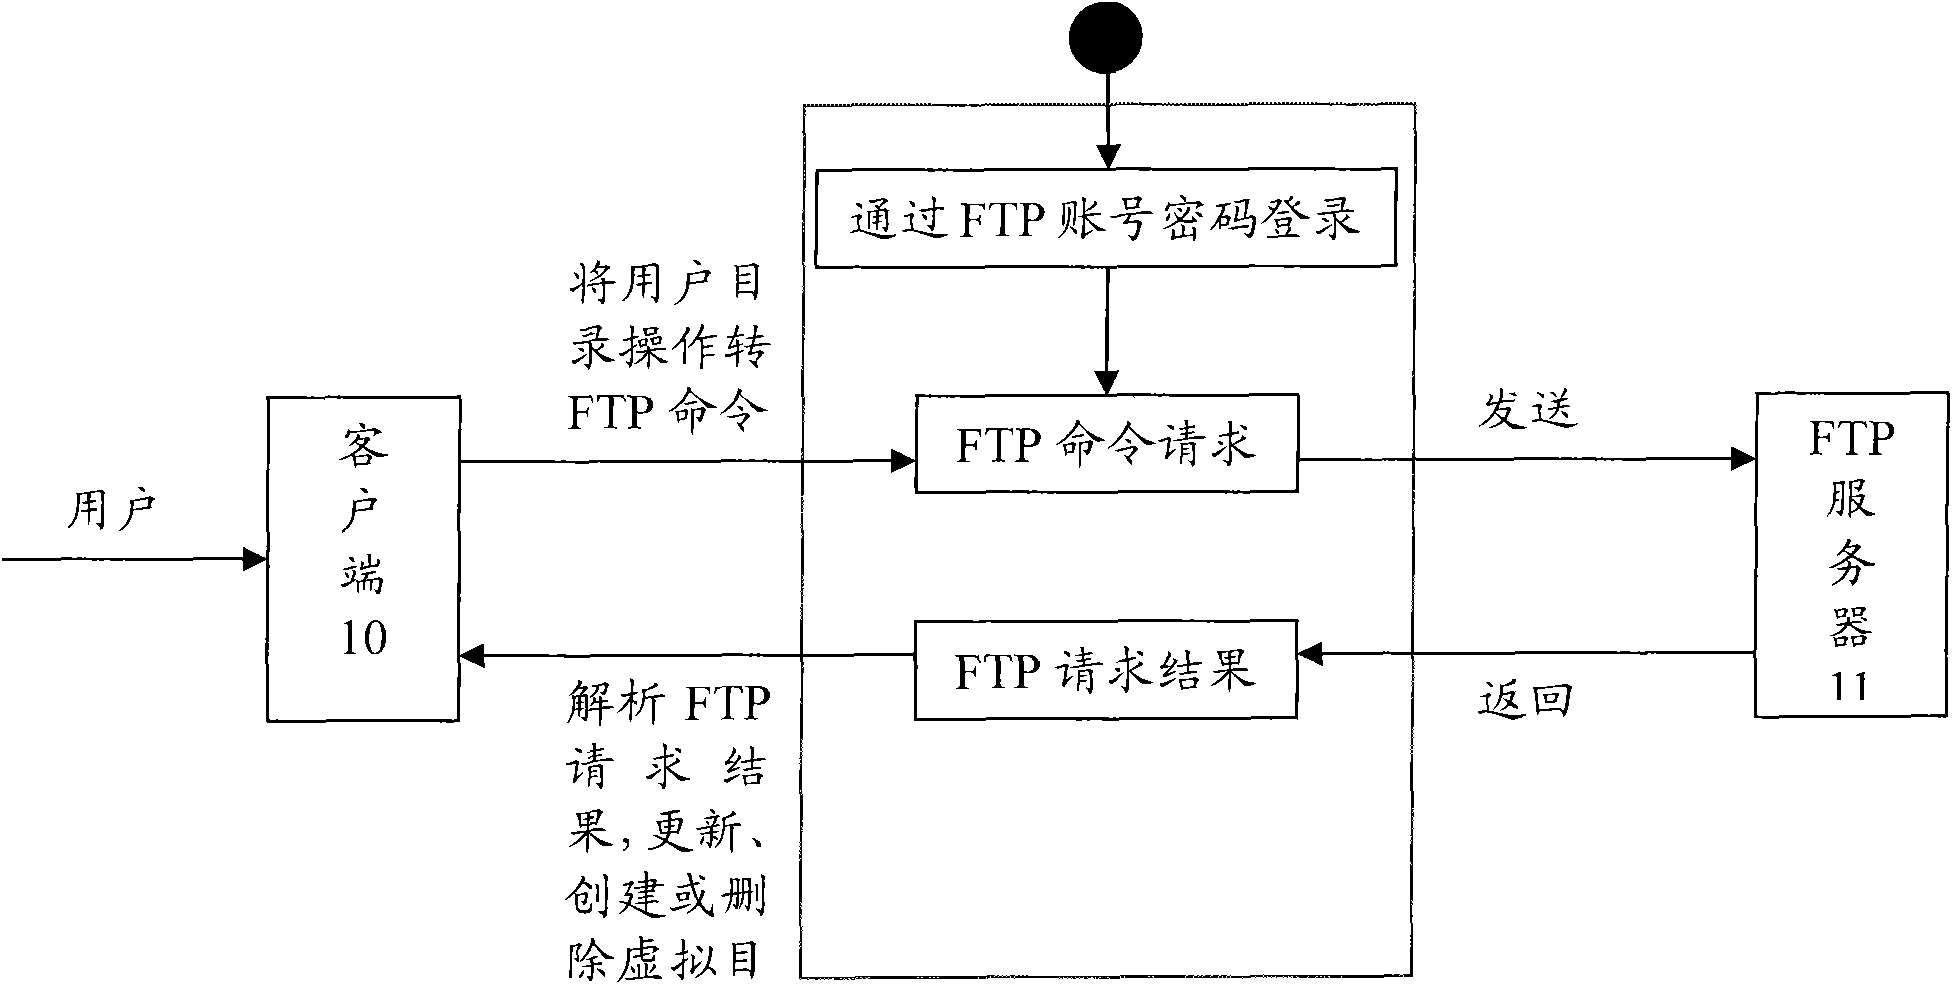 Method, device and system for managing FTP (file transfer protocol) server